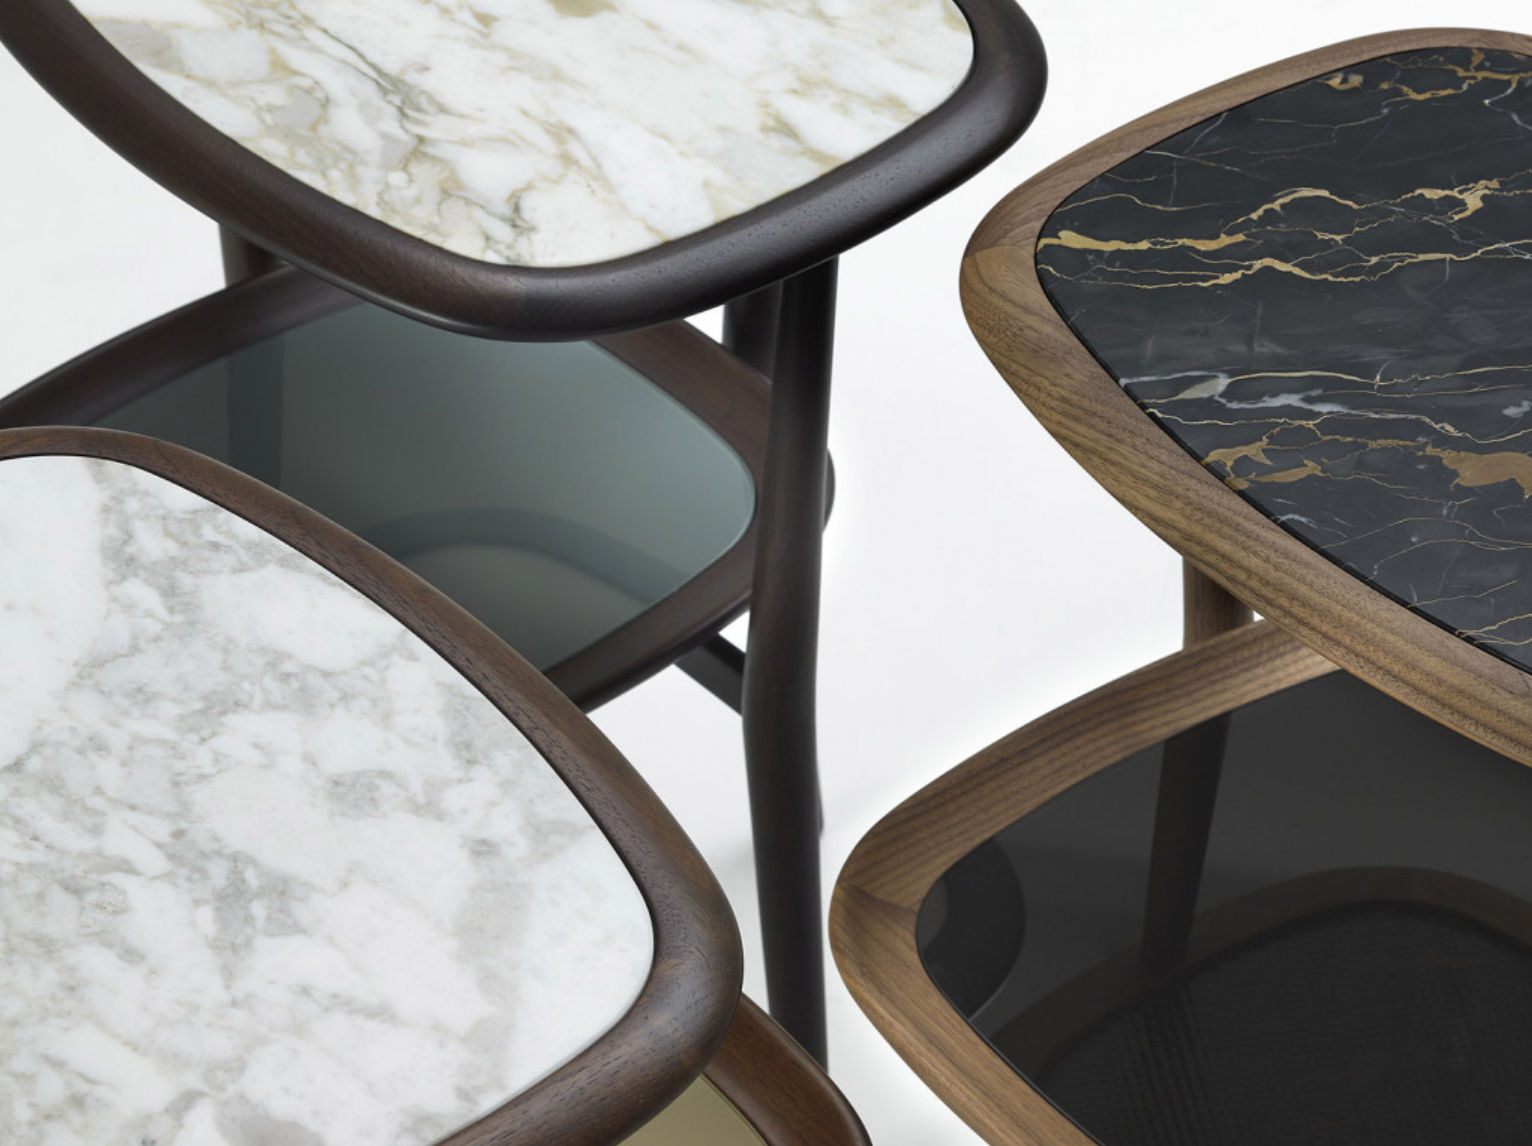 Petit Matin are special side tables designed by Roberto Lazzeroni and proposed by Peverelli